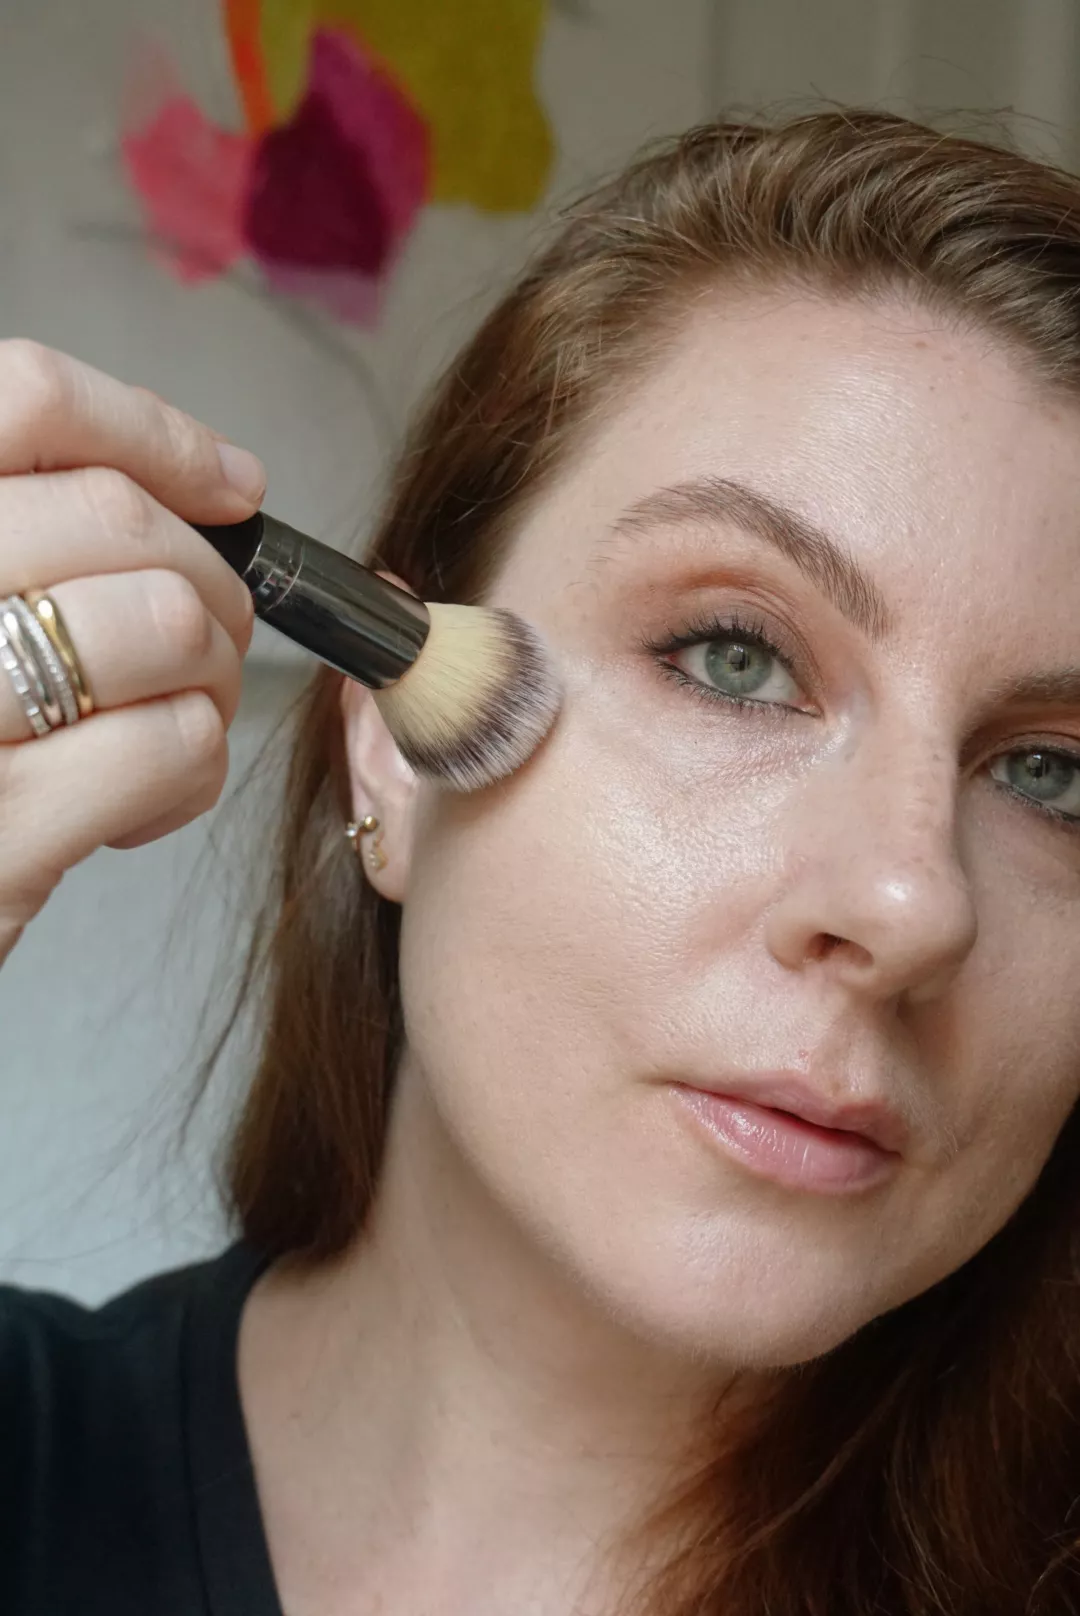 Makeup artist and Byrdie writer Ashley Rebecca applies foundation with a fluffy brush